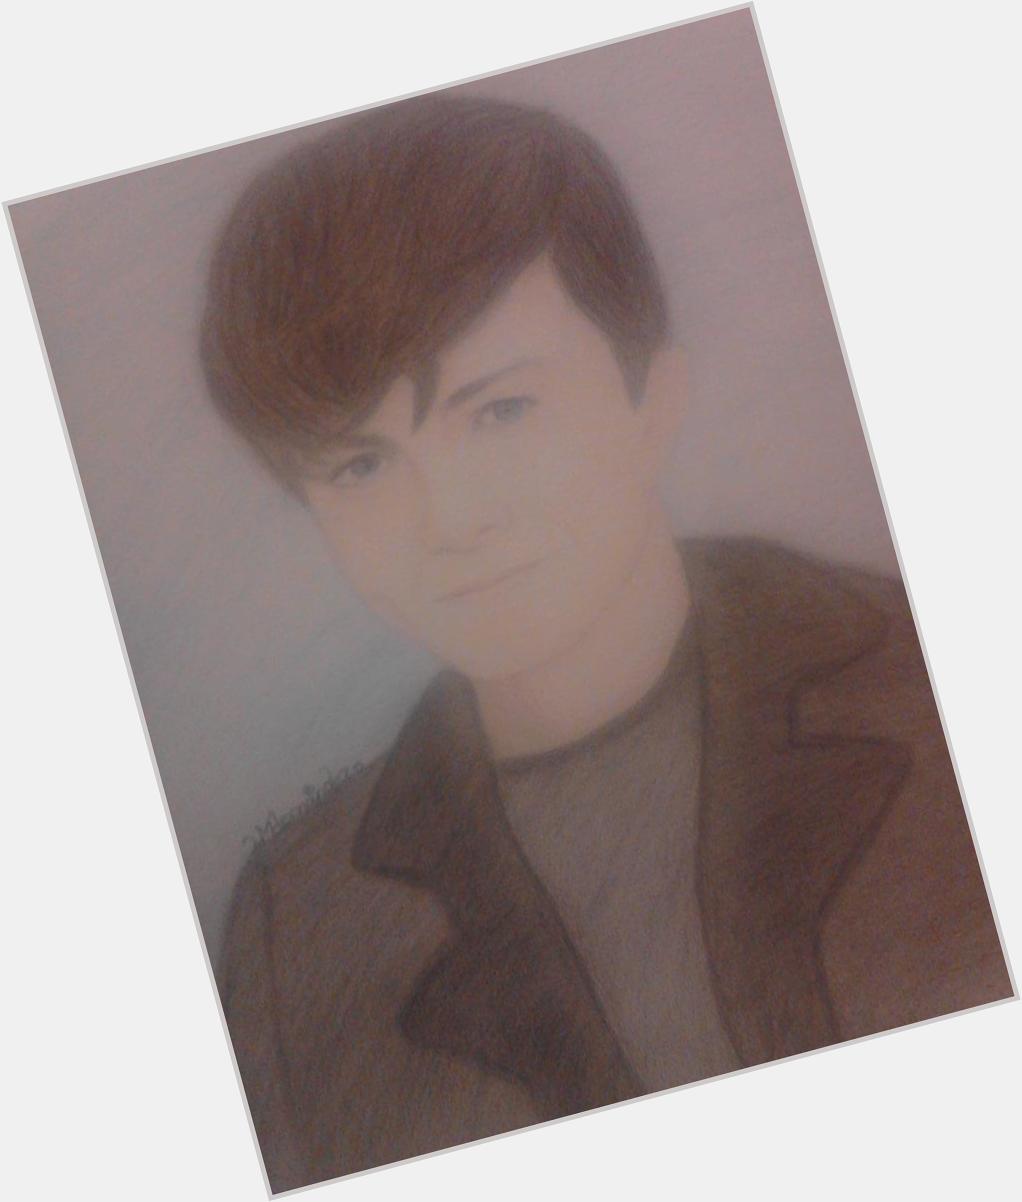  I Made This for You and Happy Birthday Brendan Meyer Happy Birthday To You! <3 :)  